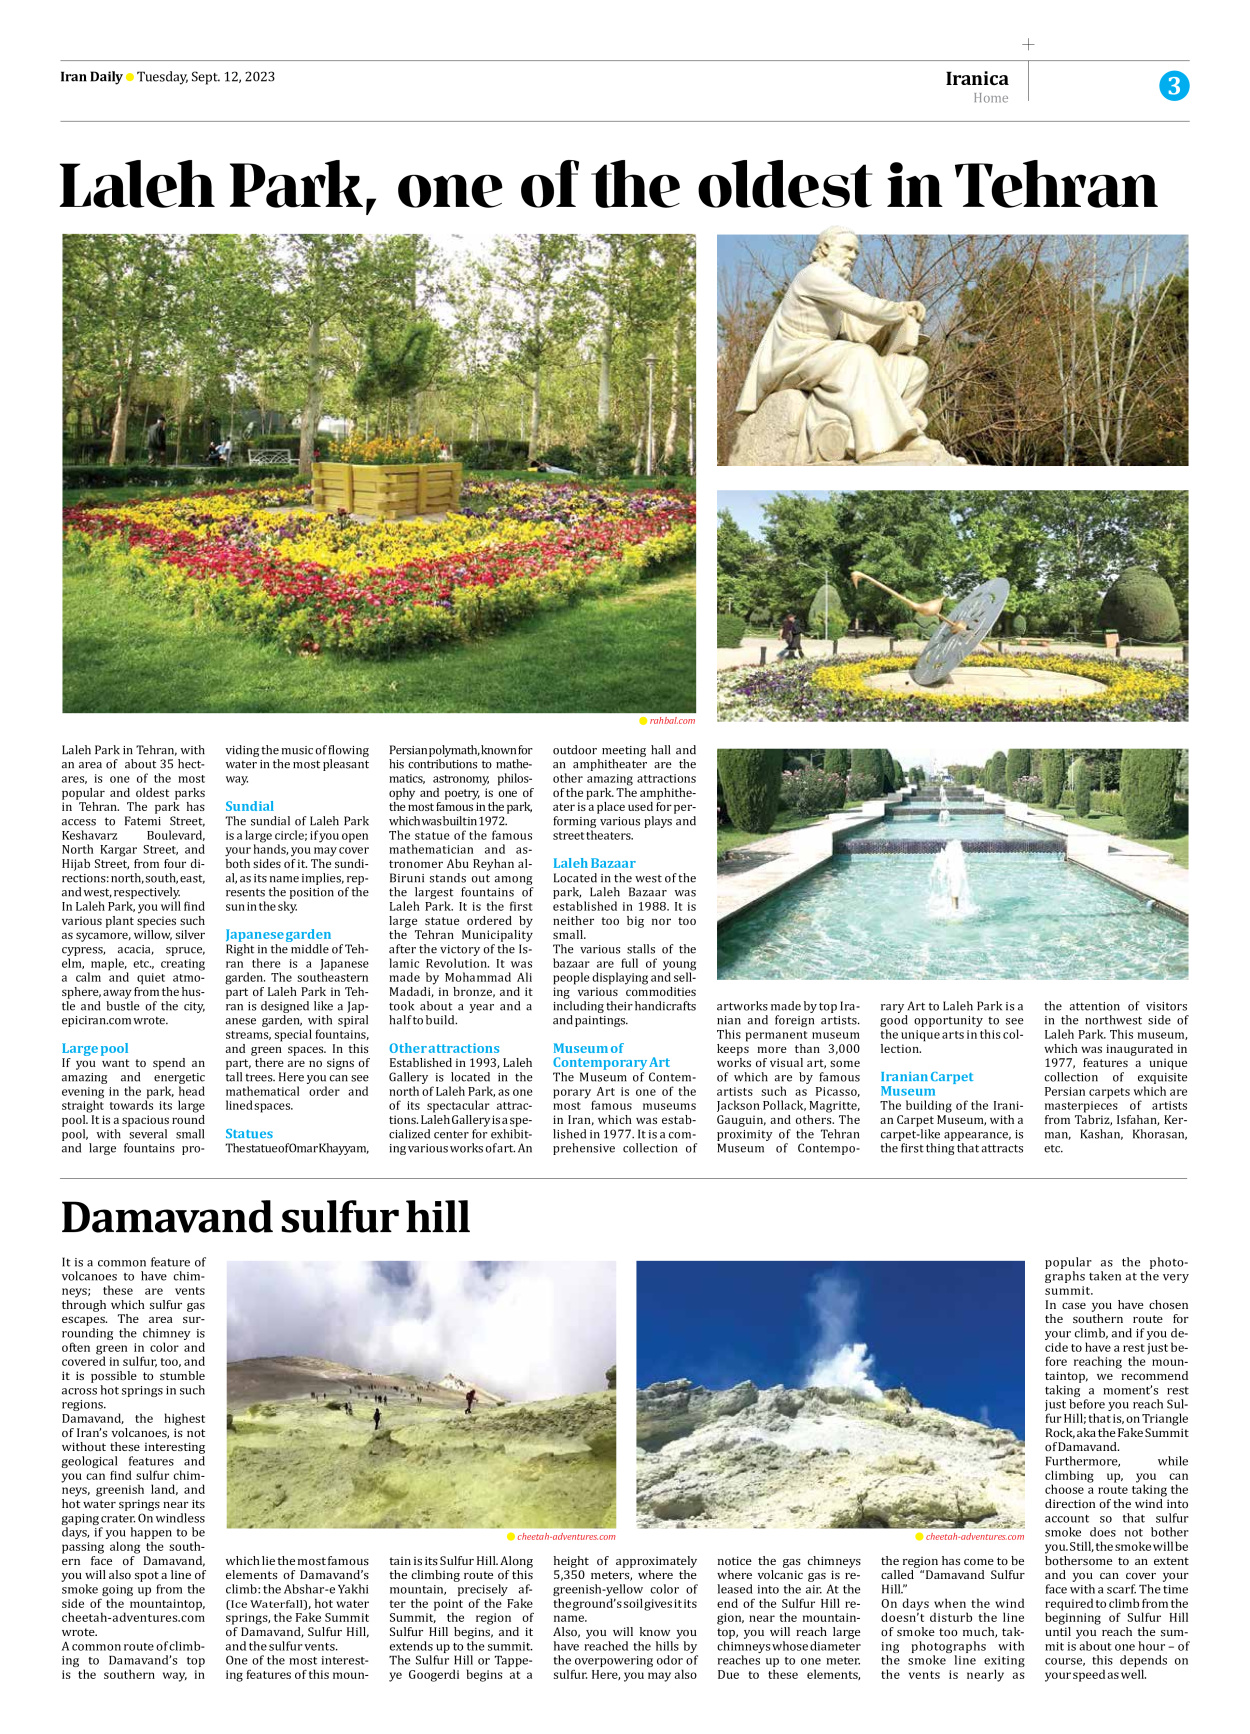 Iran Daily - Number Seven Thousand Three Hundred and Eighty Five - 12 September 2023 - Page 3